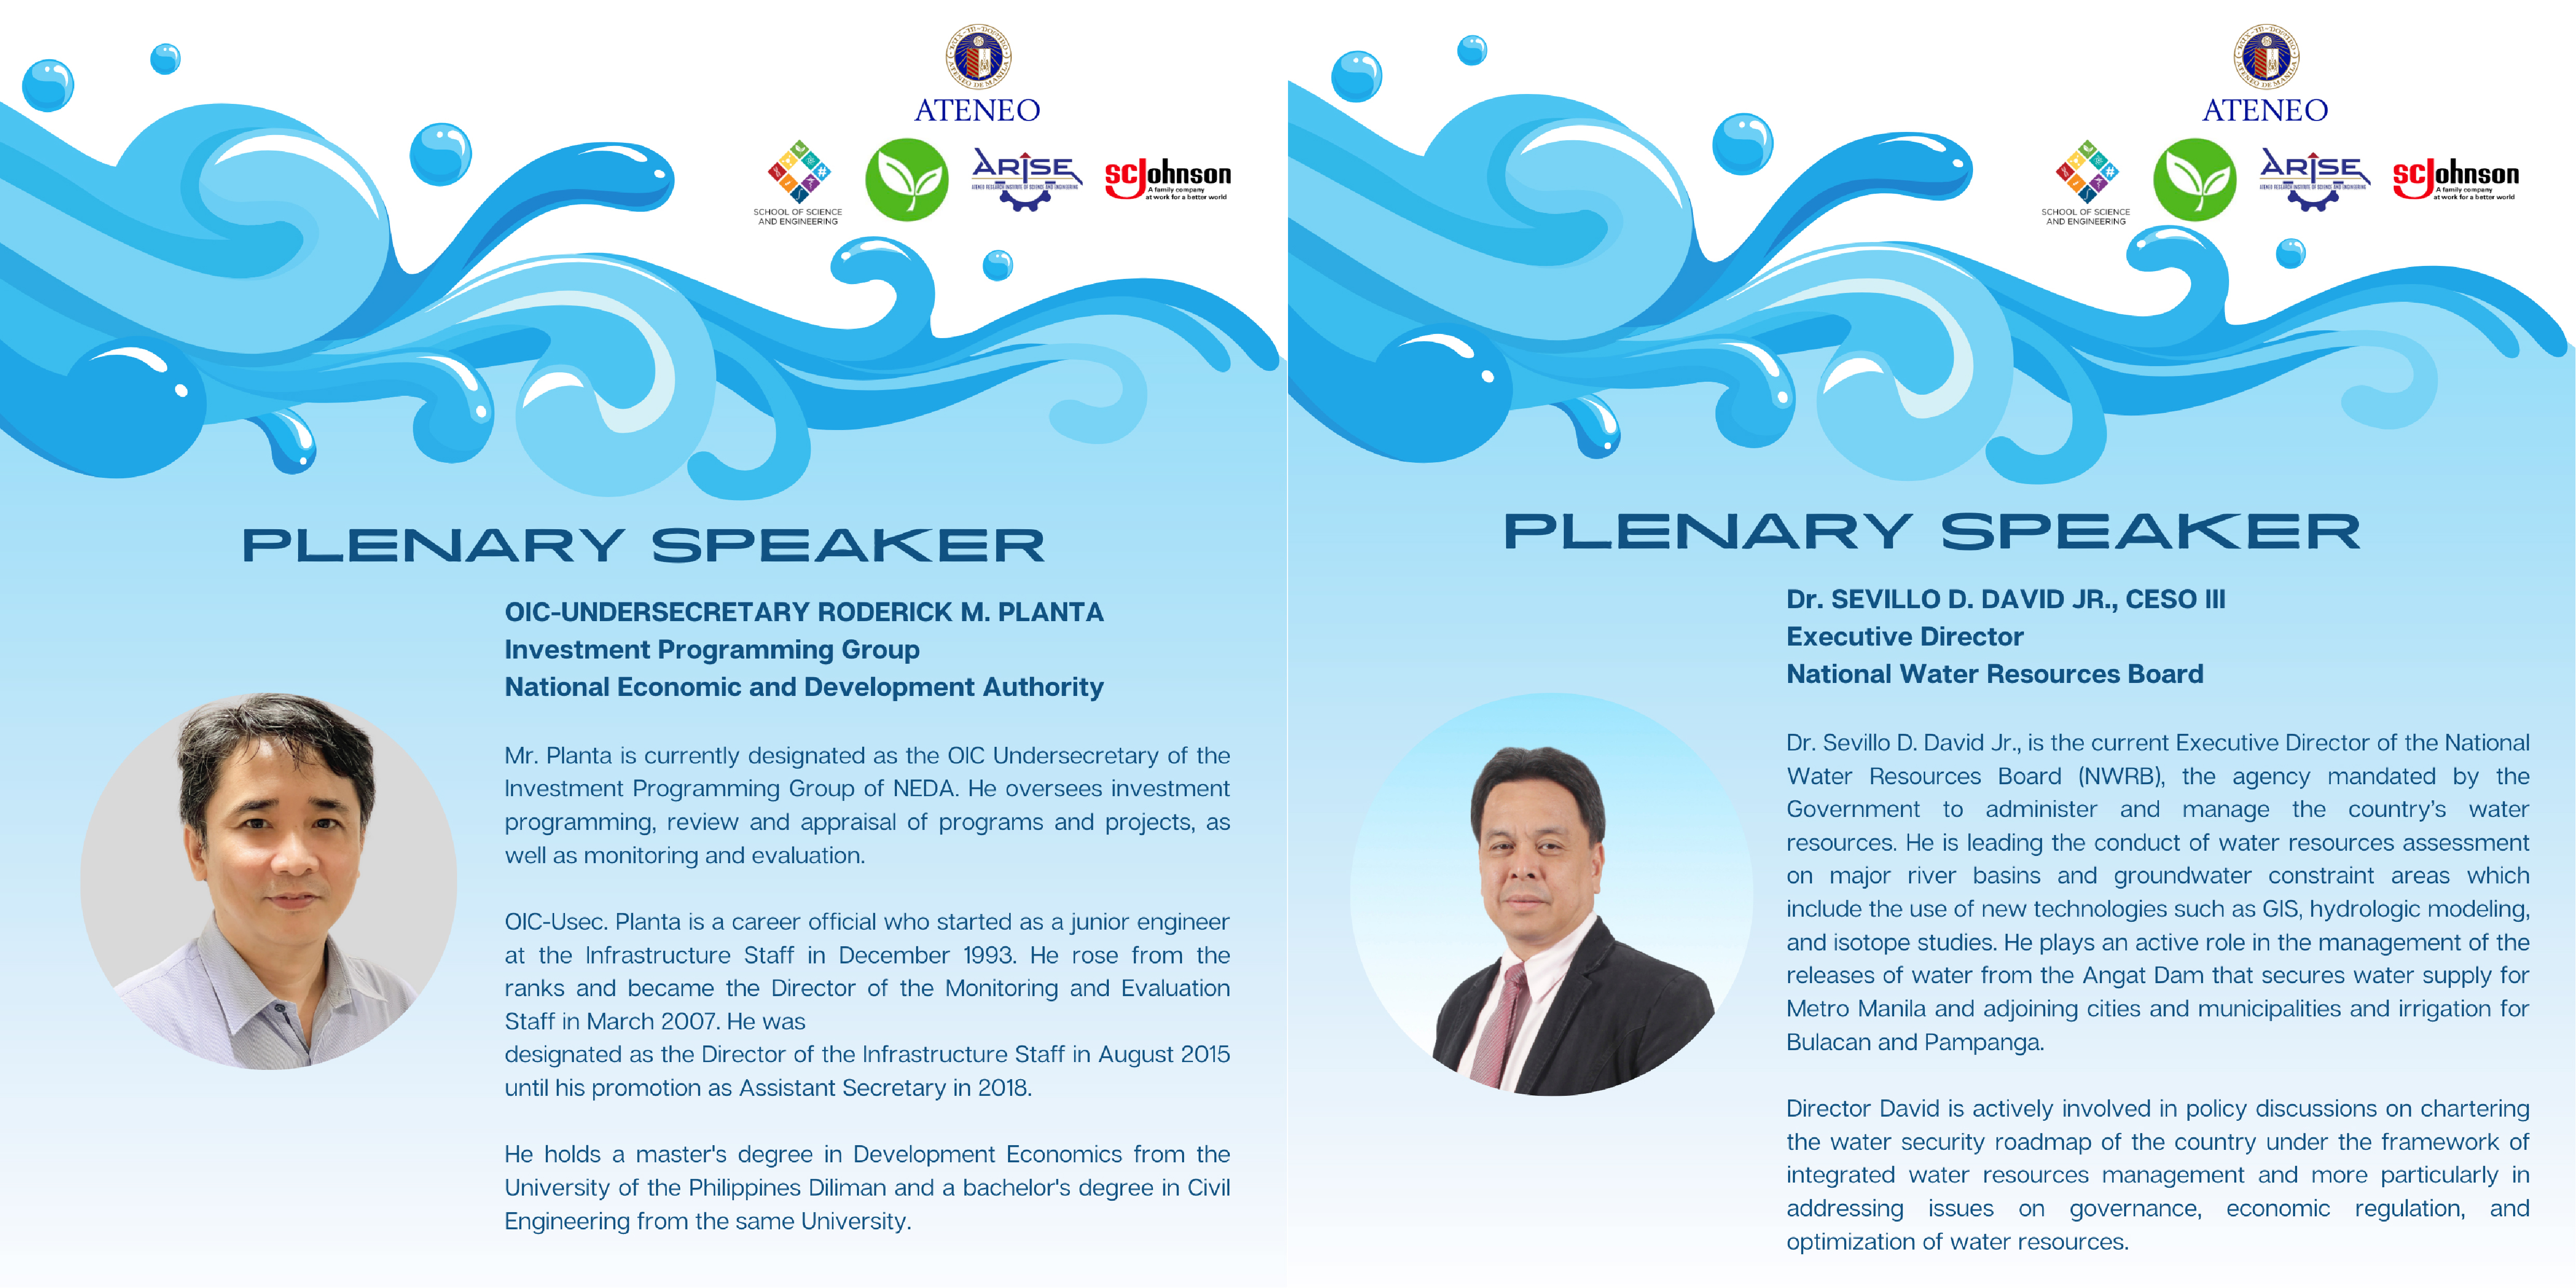 Biography of the event's speakers, Engr Roderick M Planta and Dr Sevillo David, Jr.